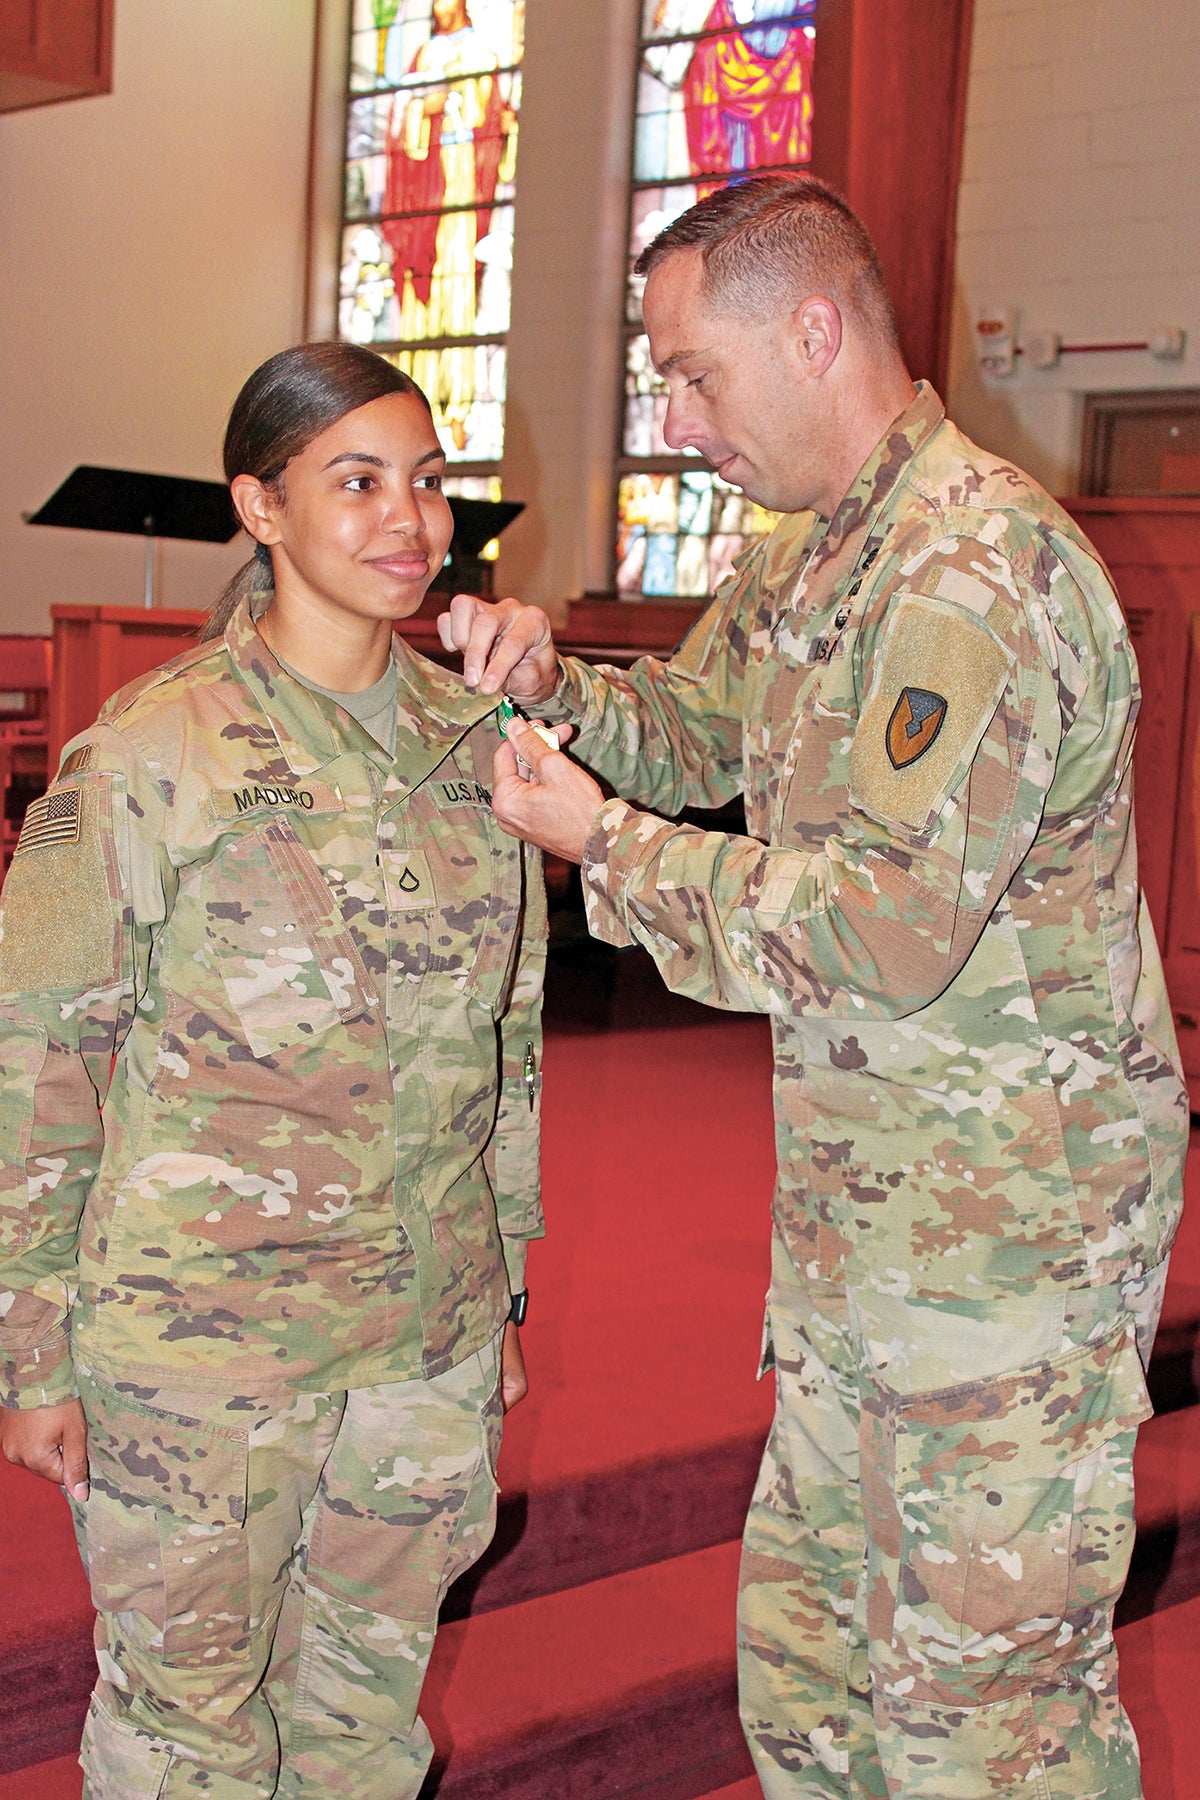 Col. Nathan Springer, right, Fort Carson garrison commander, recognizes Pfc. Jumaris Maduro, a religious affairs specialist who helped a family whose house caught on fire. (Credit: U.S. Army/Rick Emert)